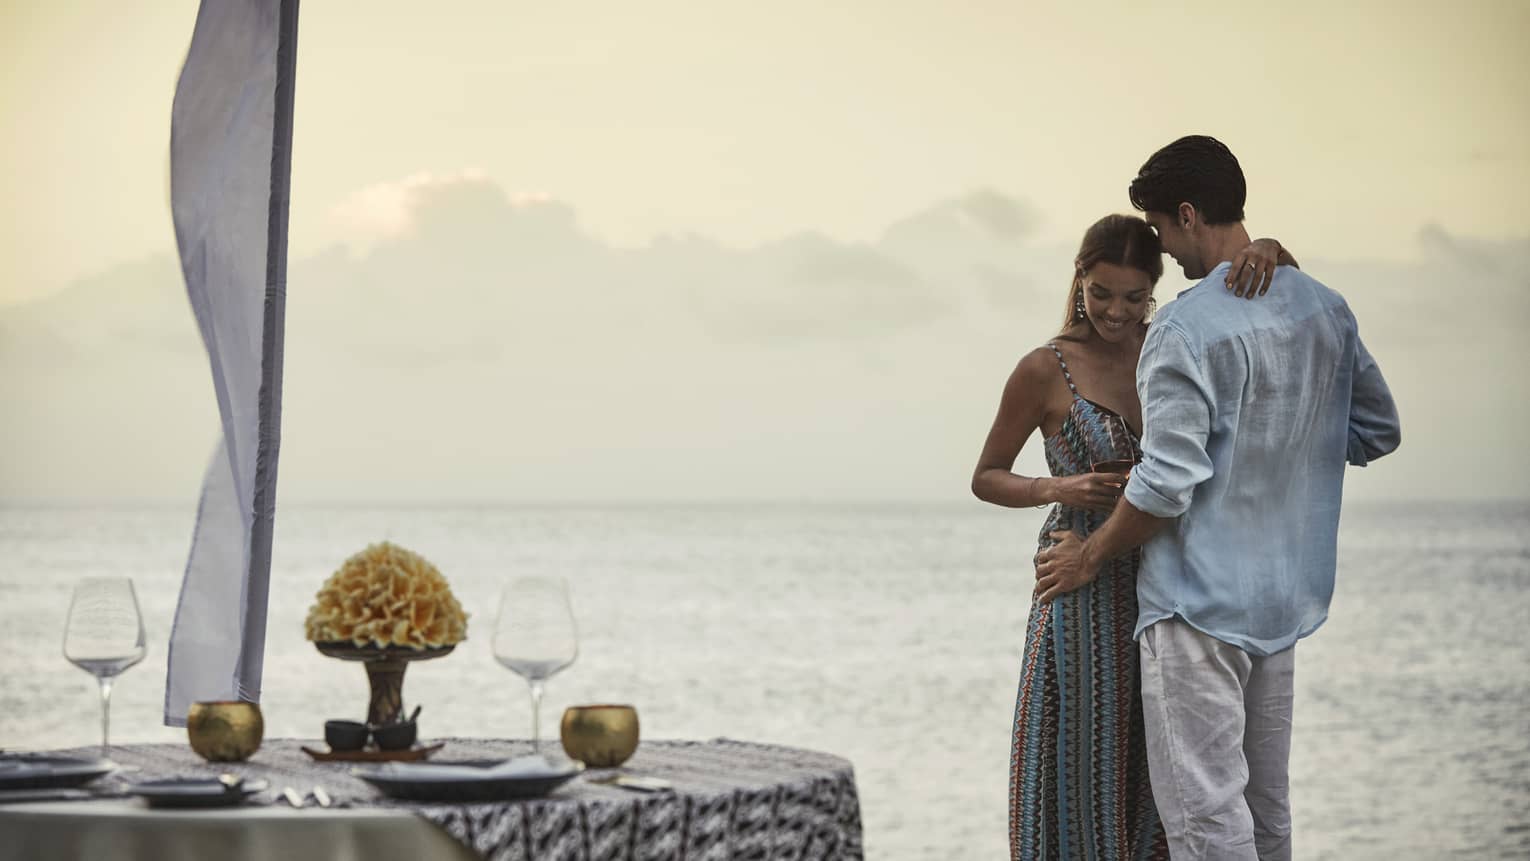 Couple embraces beside private dining table overlooking ocean at sunset